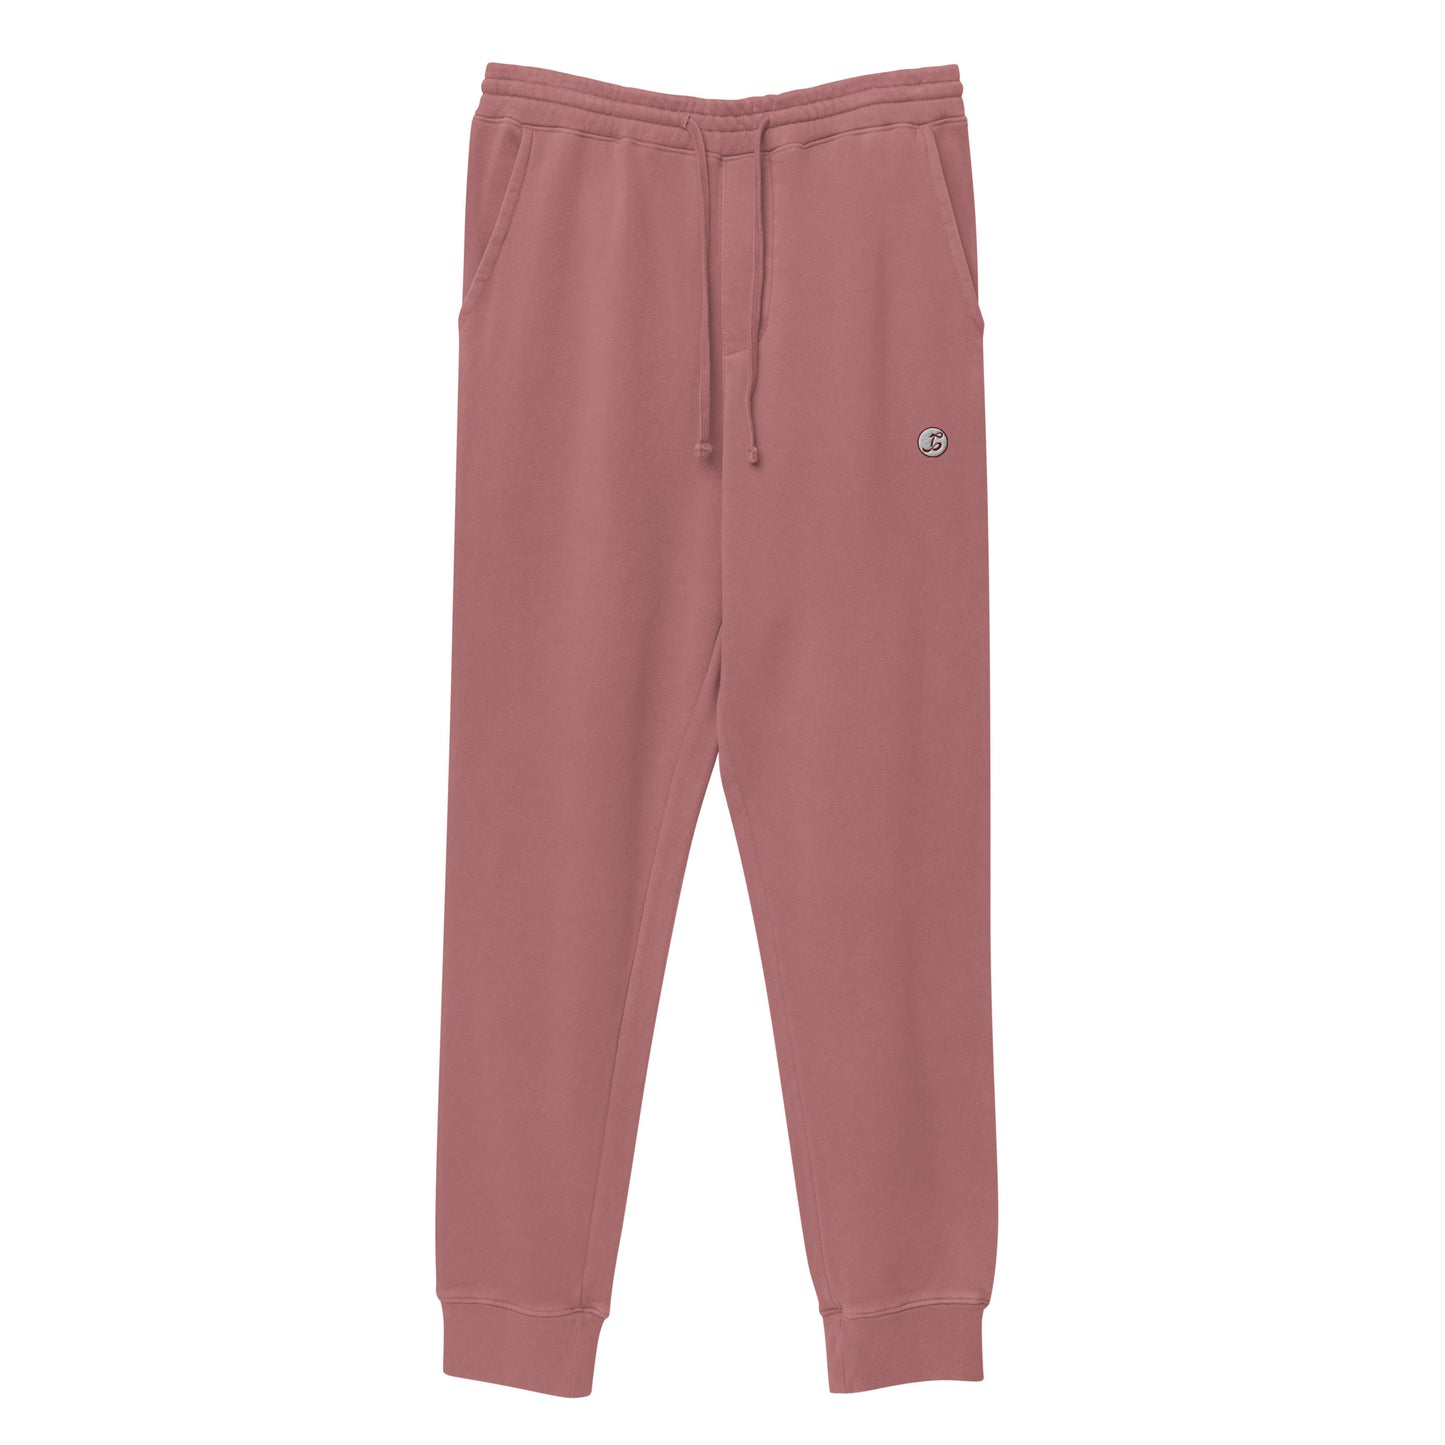 Vintage Vibes Joggers – Dusty Rose - Joggers - Cultureopolis